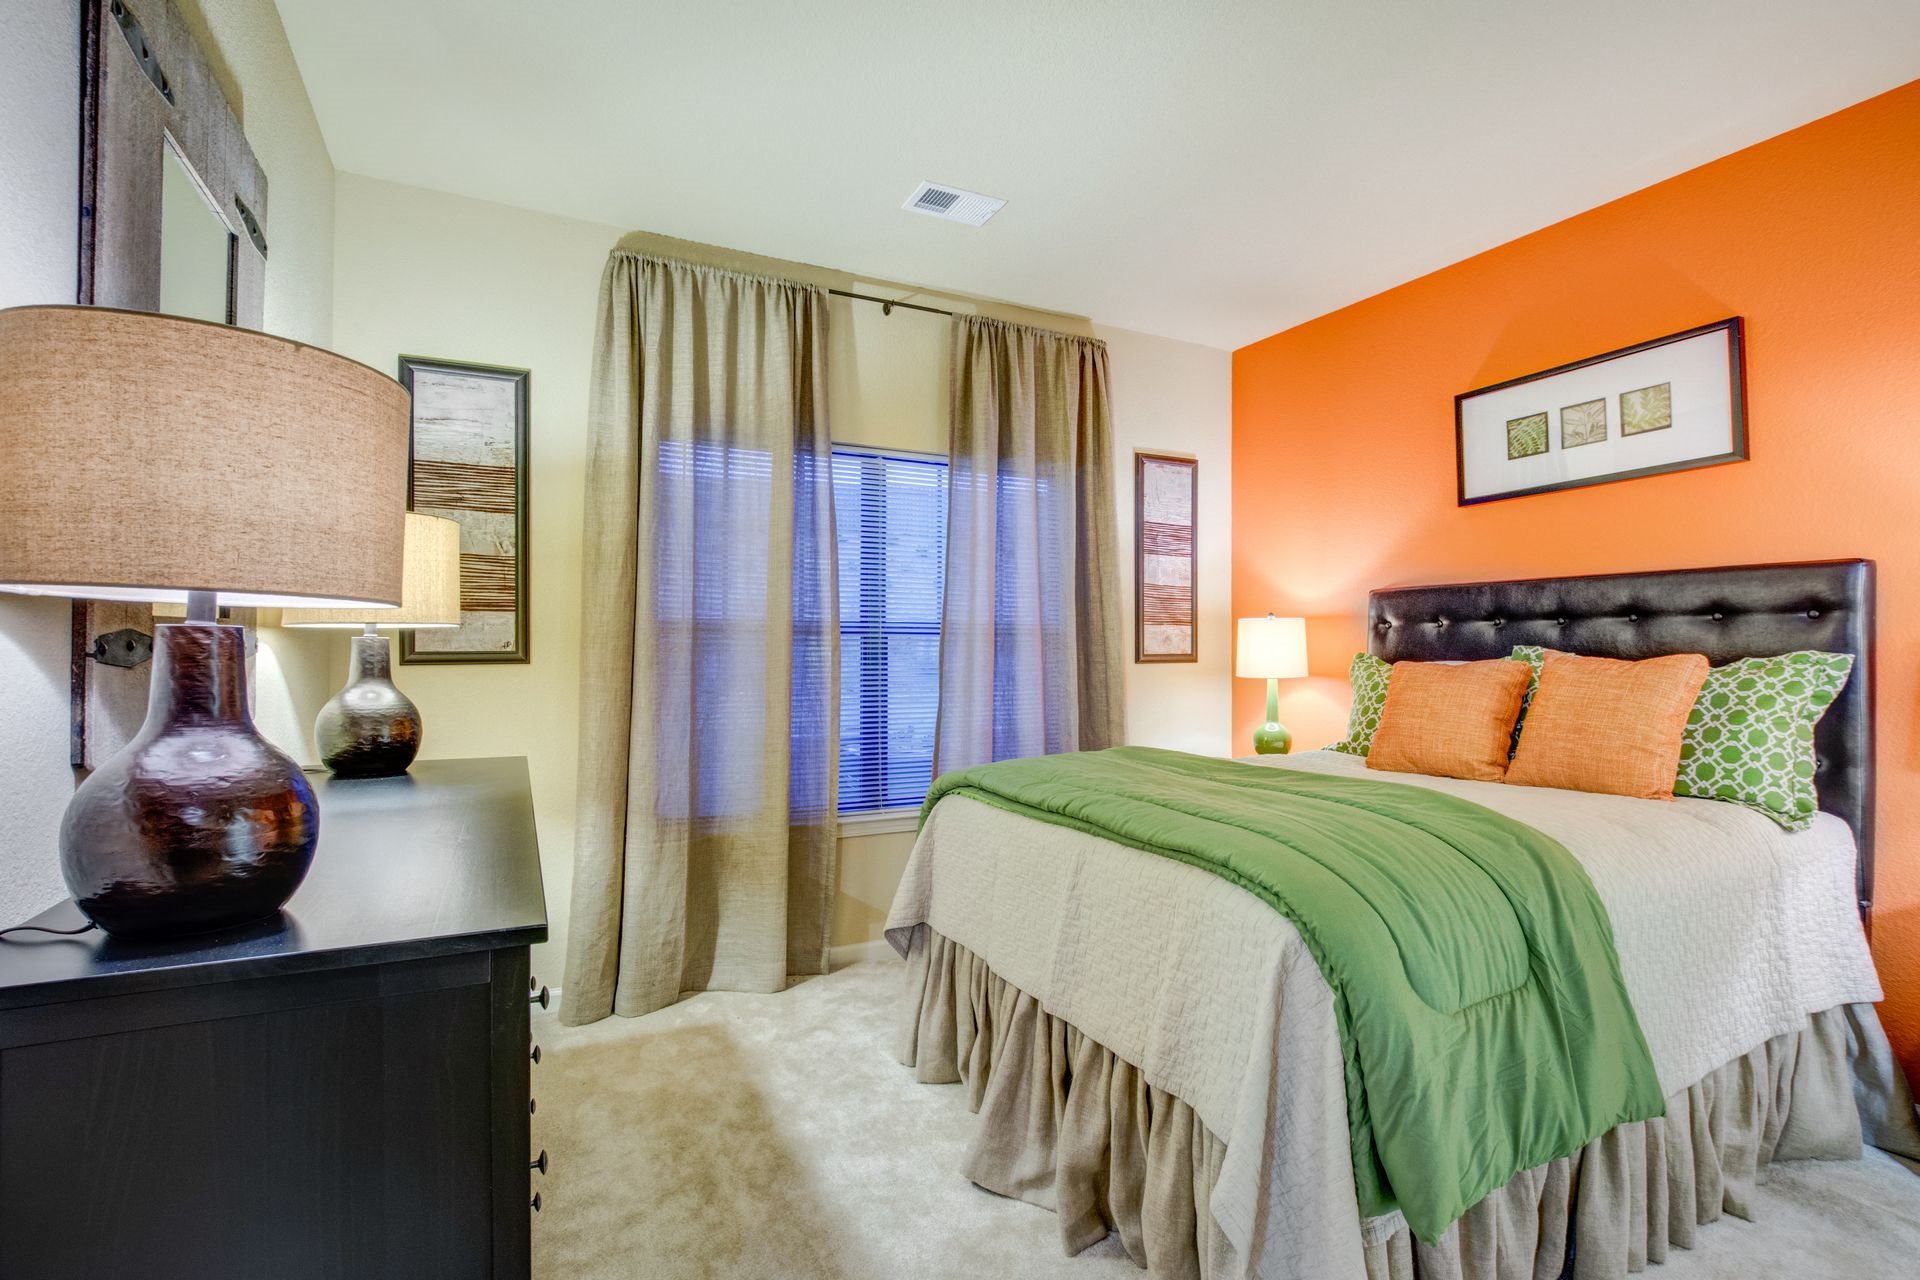 Luxurious Bedrooms at Ultris Patriot Park, Fayetteville, NC,28311